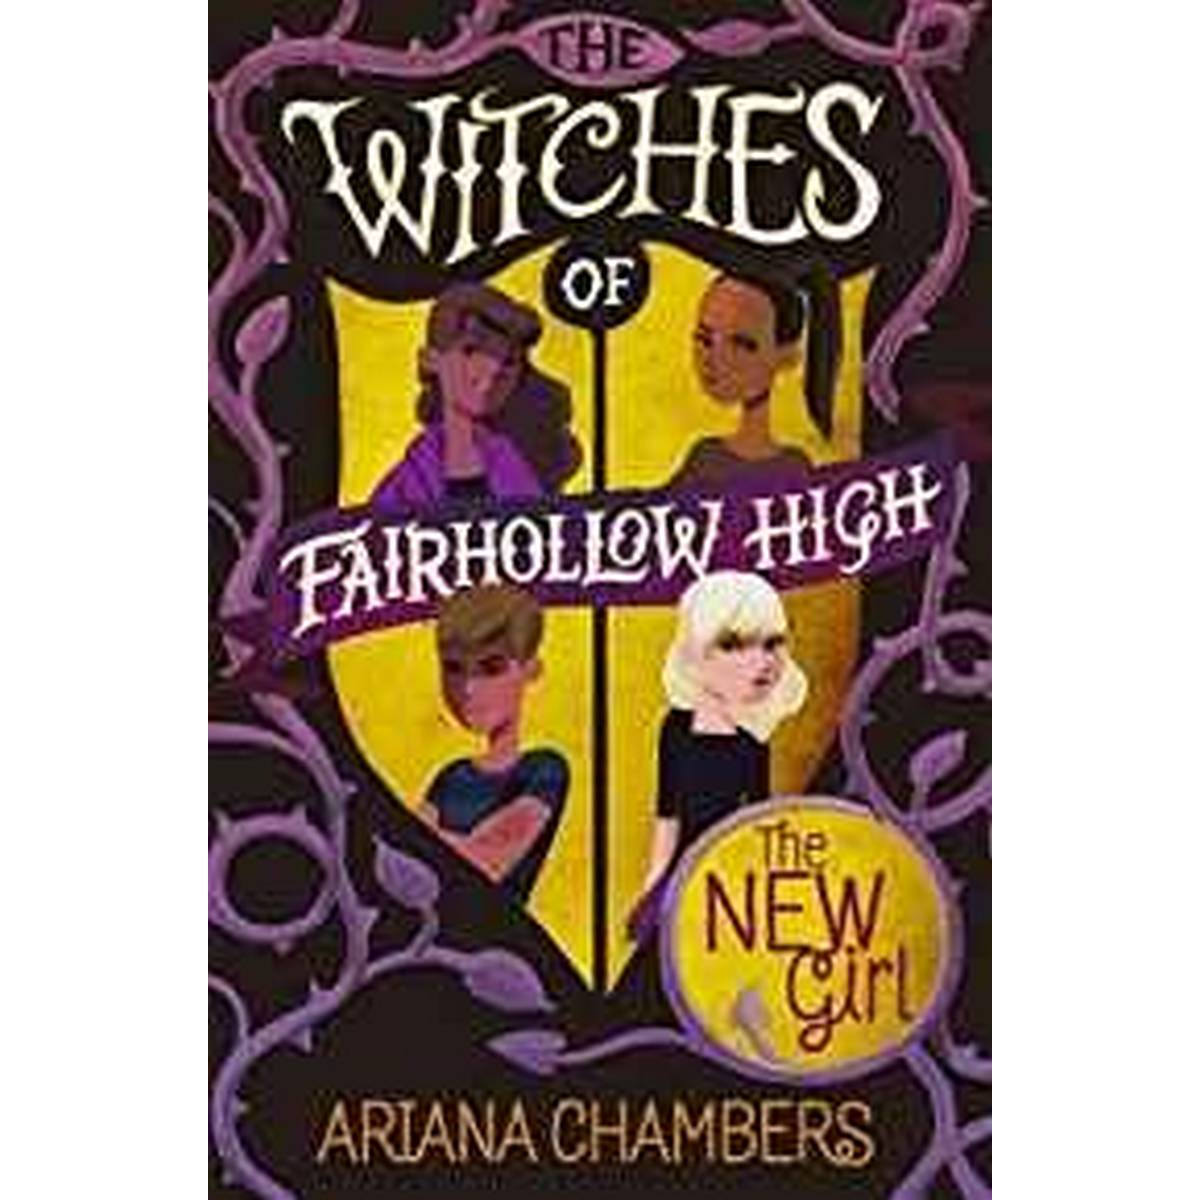 The New Girl (Witches of Fairhollow High)